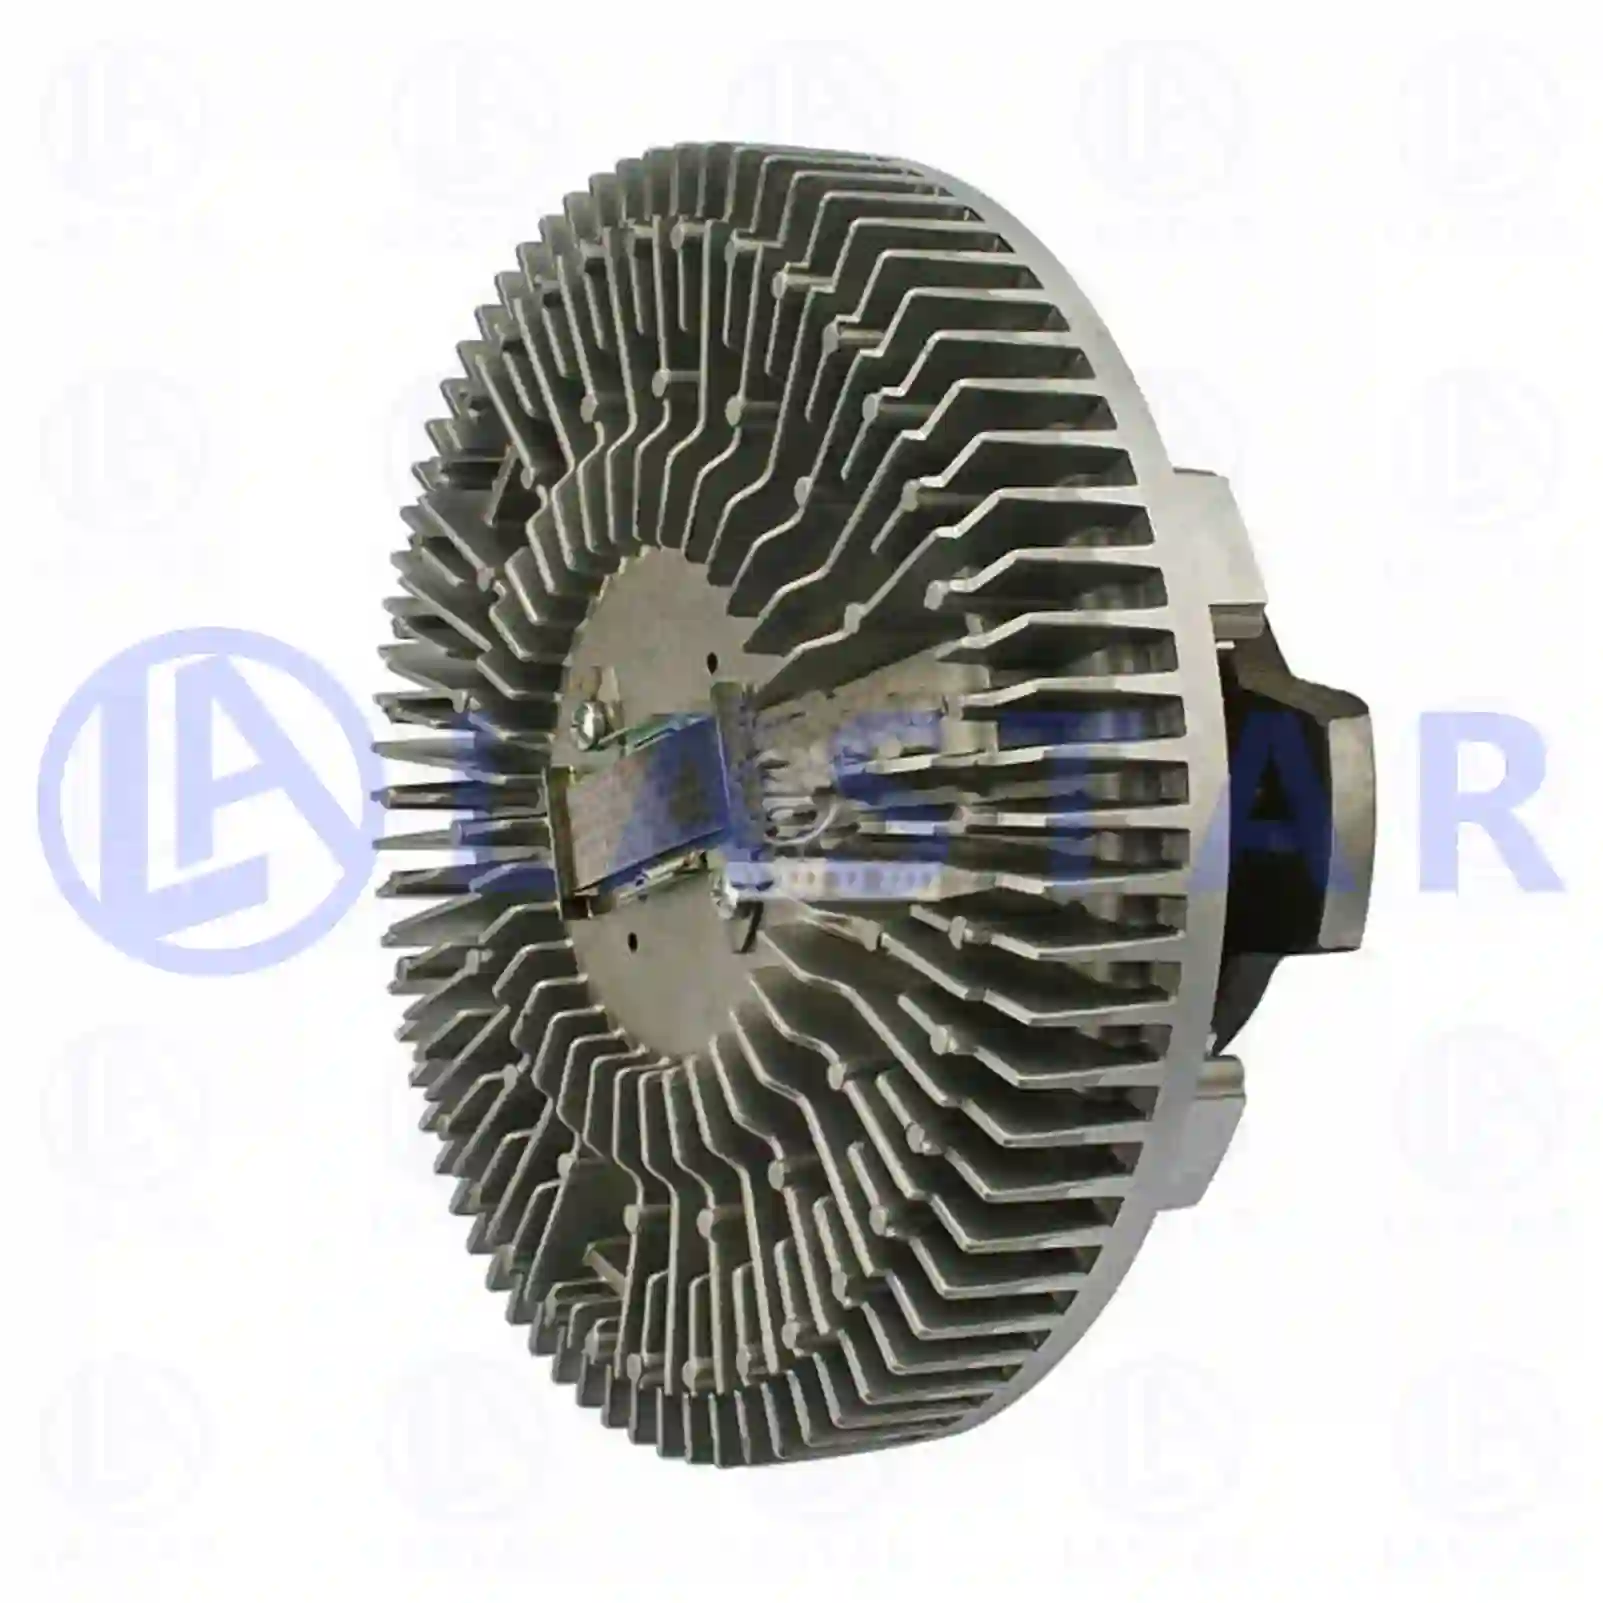 Fan clutch, 77707882, 0002003023, 0002003223, 0002003323, 0002003522, 0002003523, 0002004222, 0002004722, 0002007022, 0002007122, 0002007422, 0002008122, 0002008222 ||  77707882 Lastar Spare Part | Truck Spare Parts, Auotomotive Spare Parts Fan clutch, 77707882, 0002003023, 0002003223, 0002003323, 0002003522, 0002003523, 0002004222, 0002004722, 0002007022, 0002007122, 0002007422, 0002008122, 0002008222 ||  77707882 Lastar Spare Part | Truck Spare Parts, Auotomotive Spare Parts